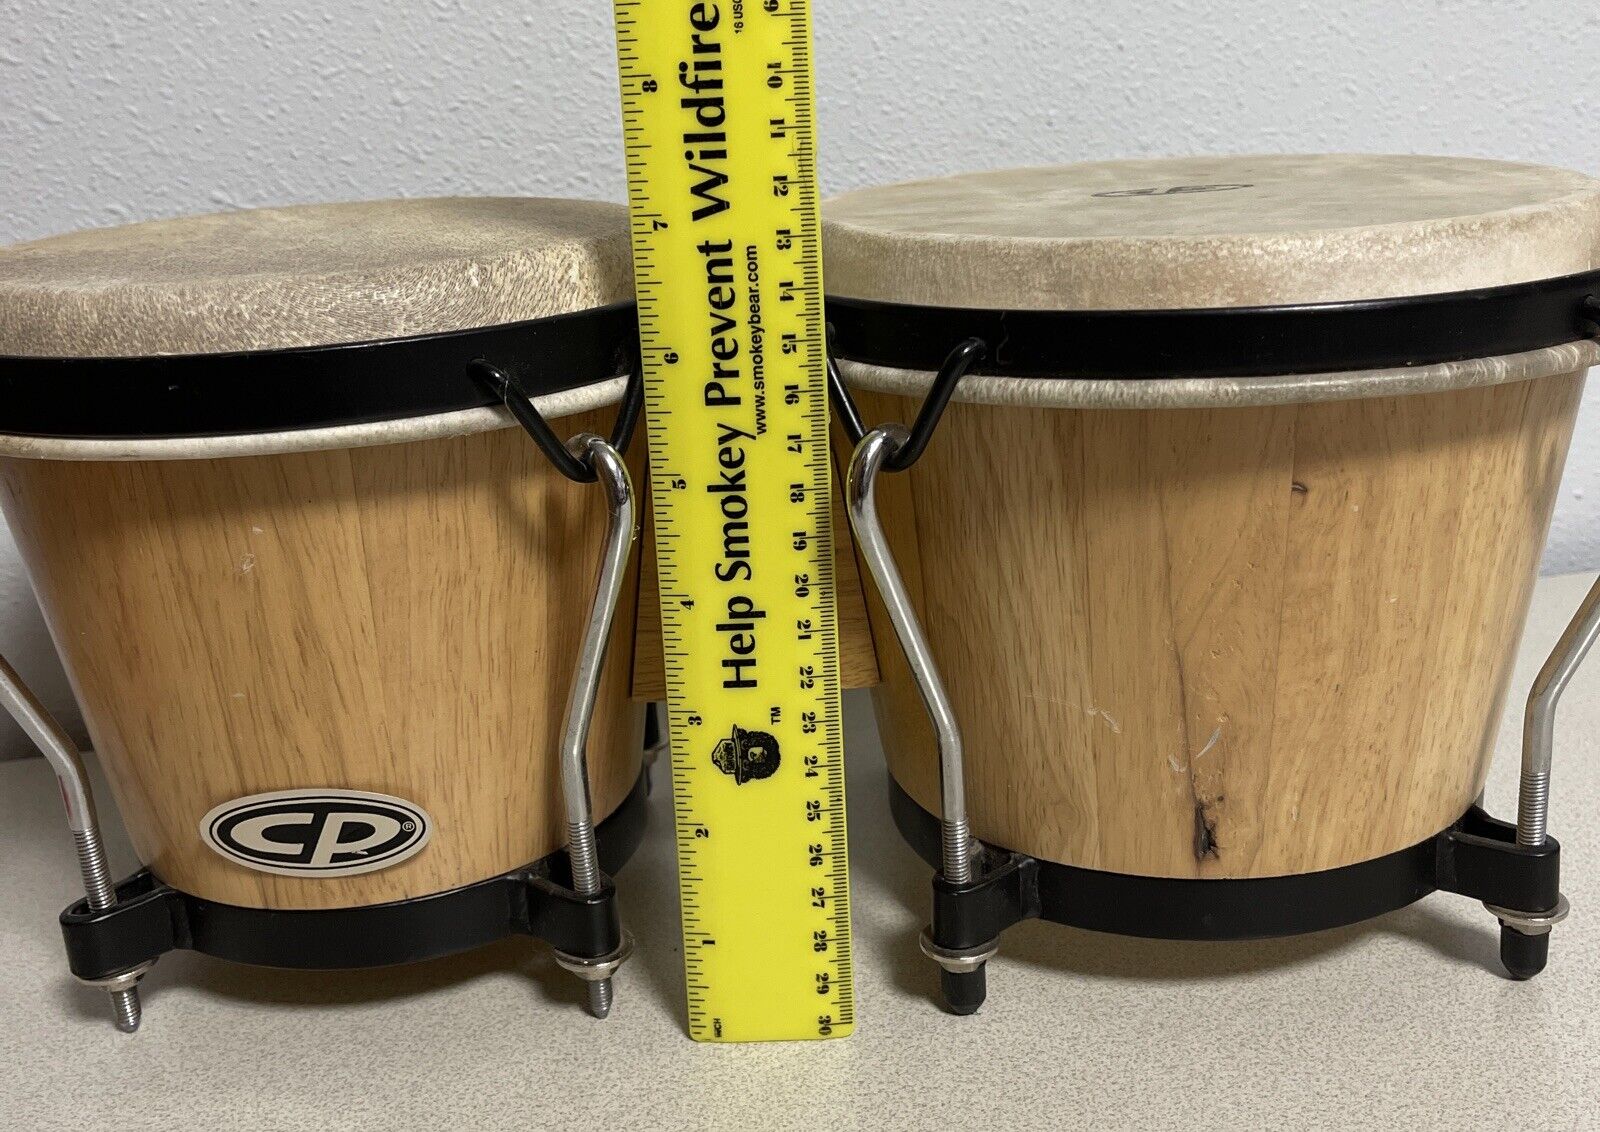 CP Cosmic Percussion Bongos 7” & 6” Drums Natural Wood Great Sound India 10